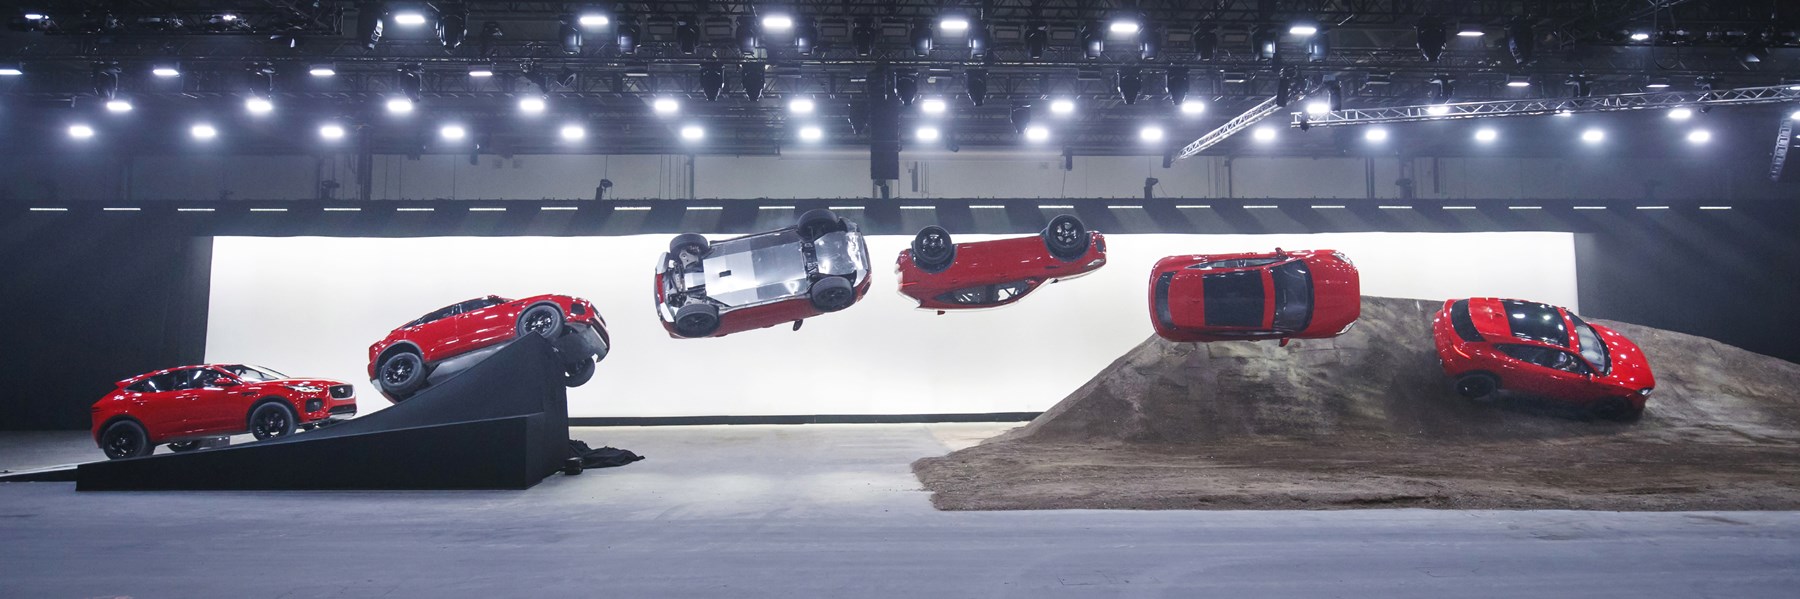 NOTE: IMAGE STRICTLY EMBARGOED UNTIL 20.00 BST, JULY 13th 2017. NO ONLINE USE PRIOR TO THIS TIME. Jaguar and stunt driver Terry Grant set a new Guinness World Record for longest barrel roll at the global launch of the new Jaguar E-PACE at ExCel London. (Image composite)